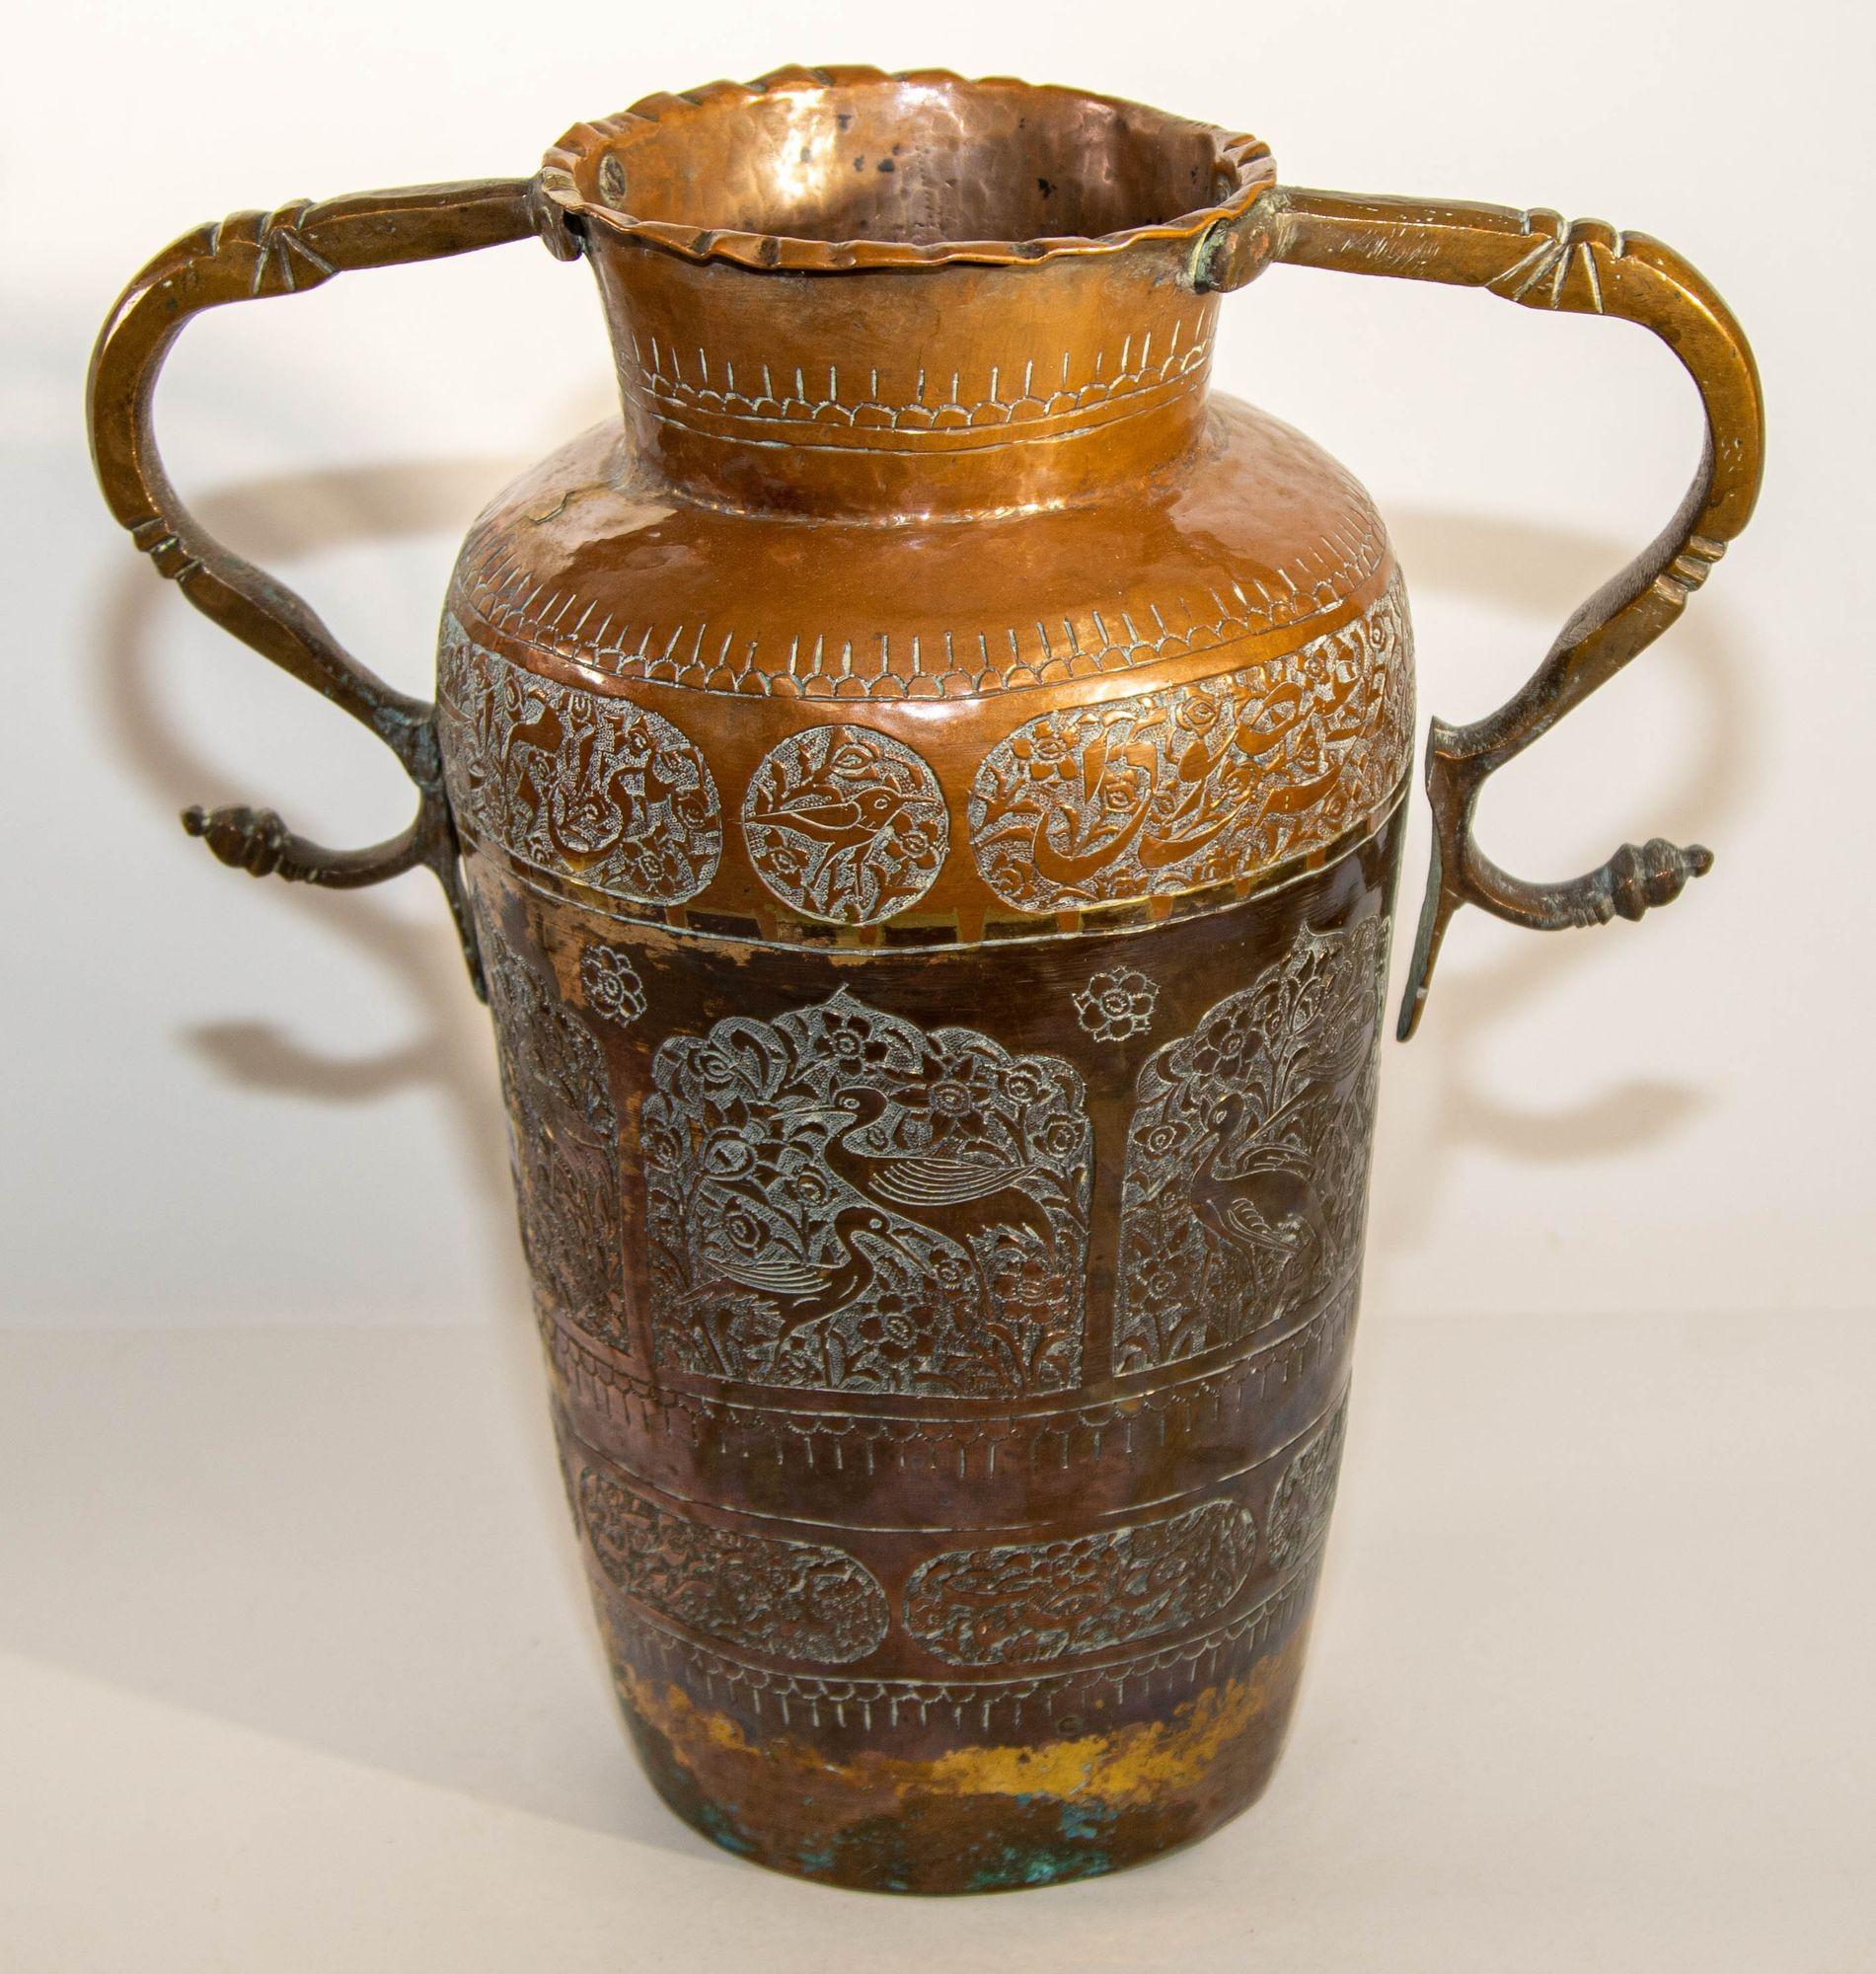 19th century Antique Middle Eastern Islamic Copper Vase with Snake Handles.
Large Islamic Asian copper vase with traditional Islamic Moorish embossed floral and Arabic writing design, medallion with birds and foliages.
Handmade Islamic Moorish